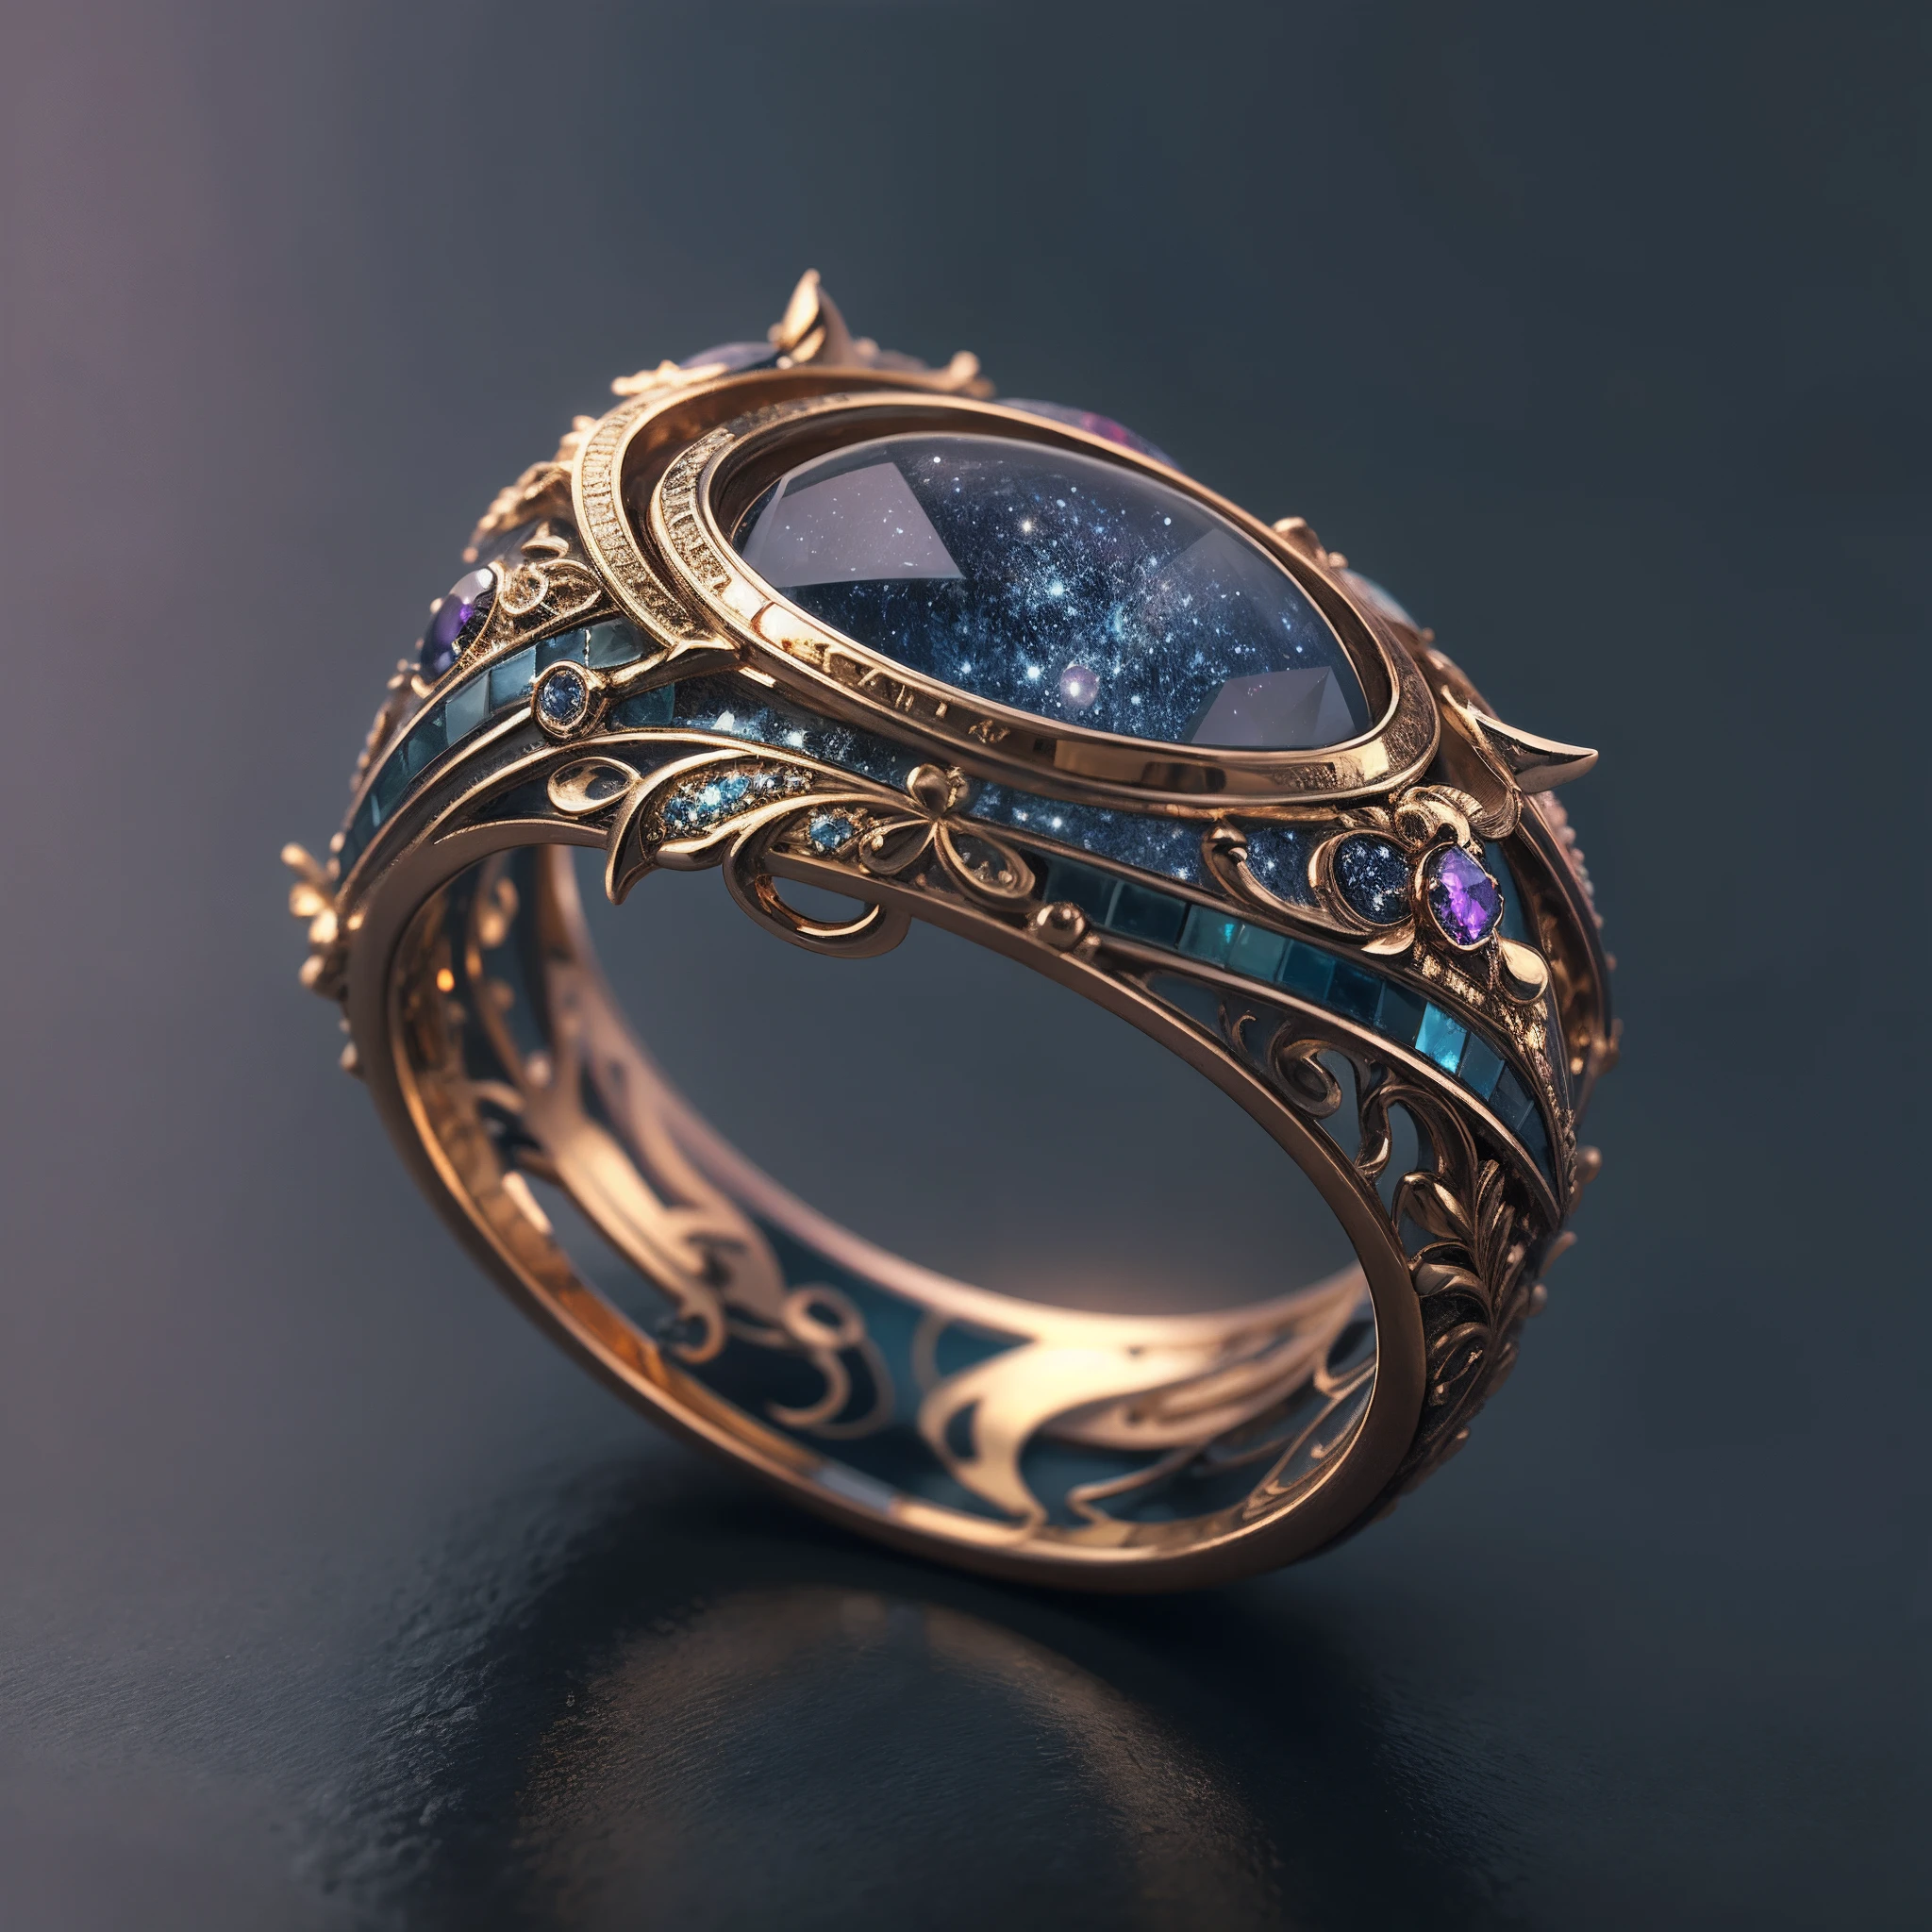 Masterpiece，highest  quality，(Nothing but the ring)，(No Man),Phoenix ring setting，starrysky，Wrapped around the end from beginning to end，Delicate silver ring，Starry sky in the ring,The sheen，inverted image，Sparkling blue-purple gemstones，Elegant and noble，The magic pattern on it emits the light of the Tyndall effechines with a noble red light，The golden-red tone is filled with dark-style graphics，simple backgound，